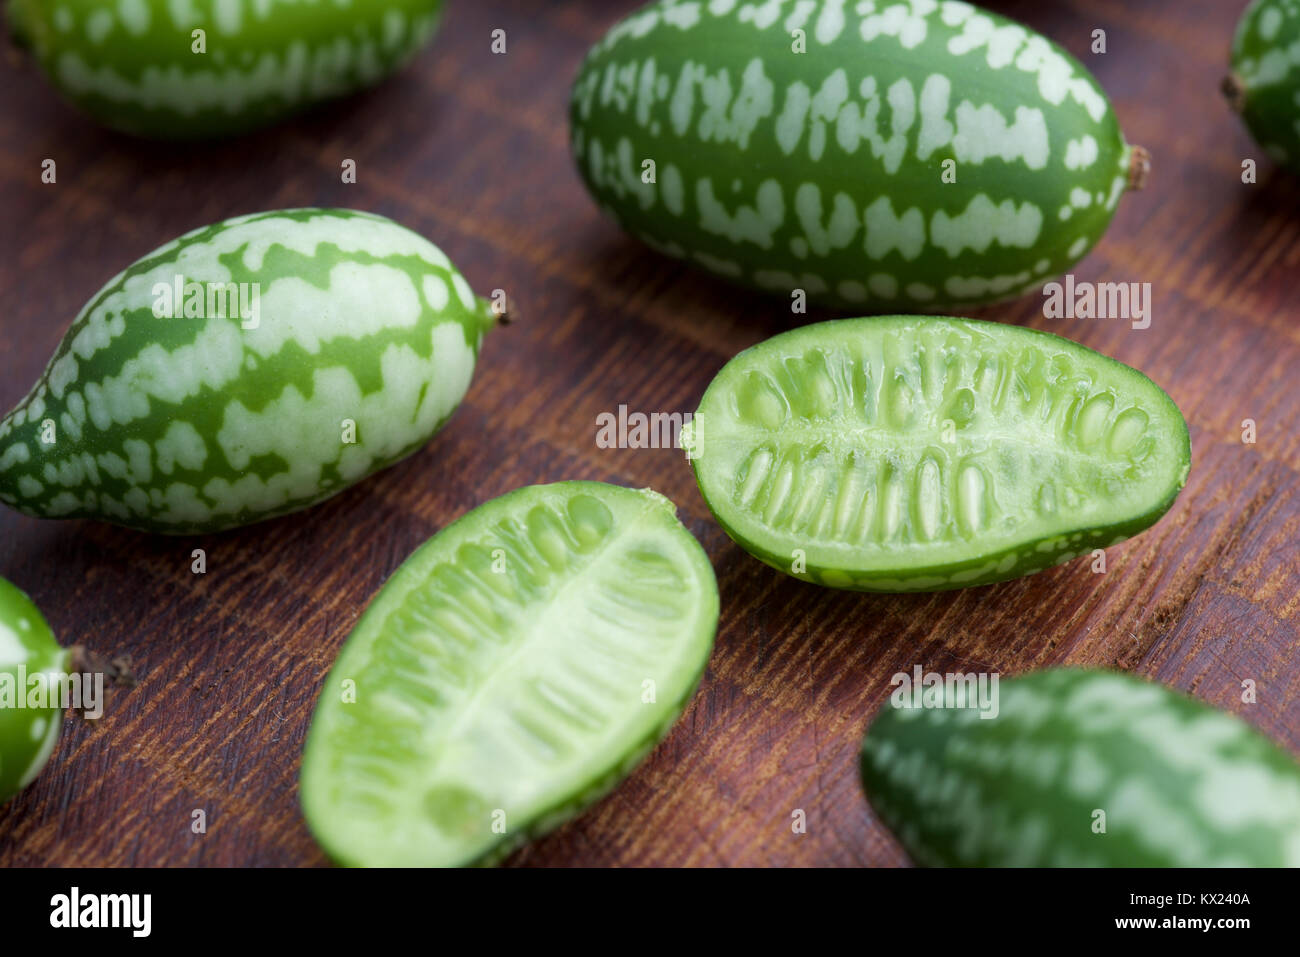 Cucamelon fruit, also known as Mexican gherkins, Mexican sour cucumbers, or Melothria Scabra on a dark brown wood grain background Stock Photo